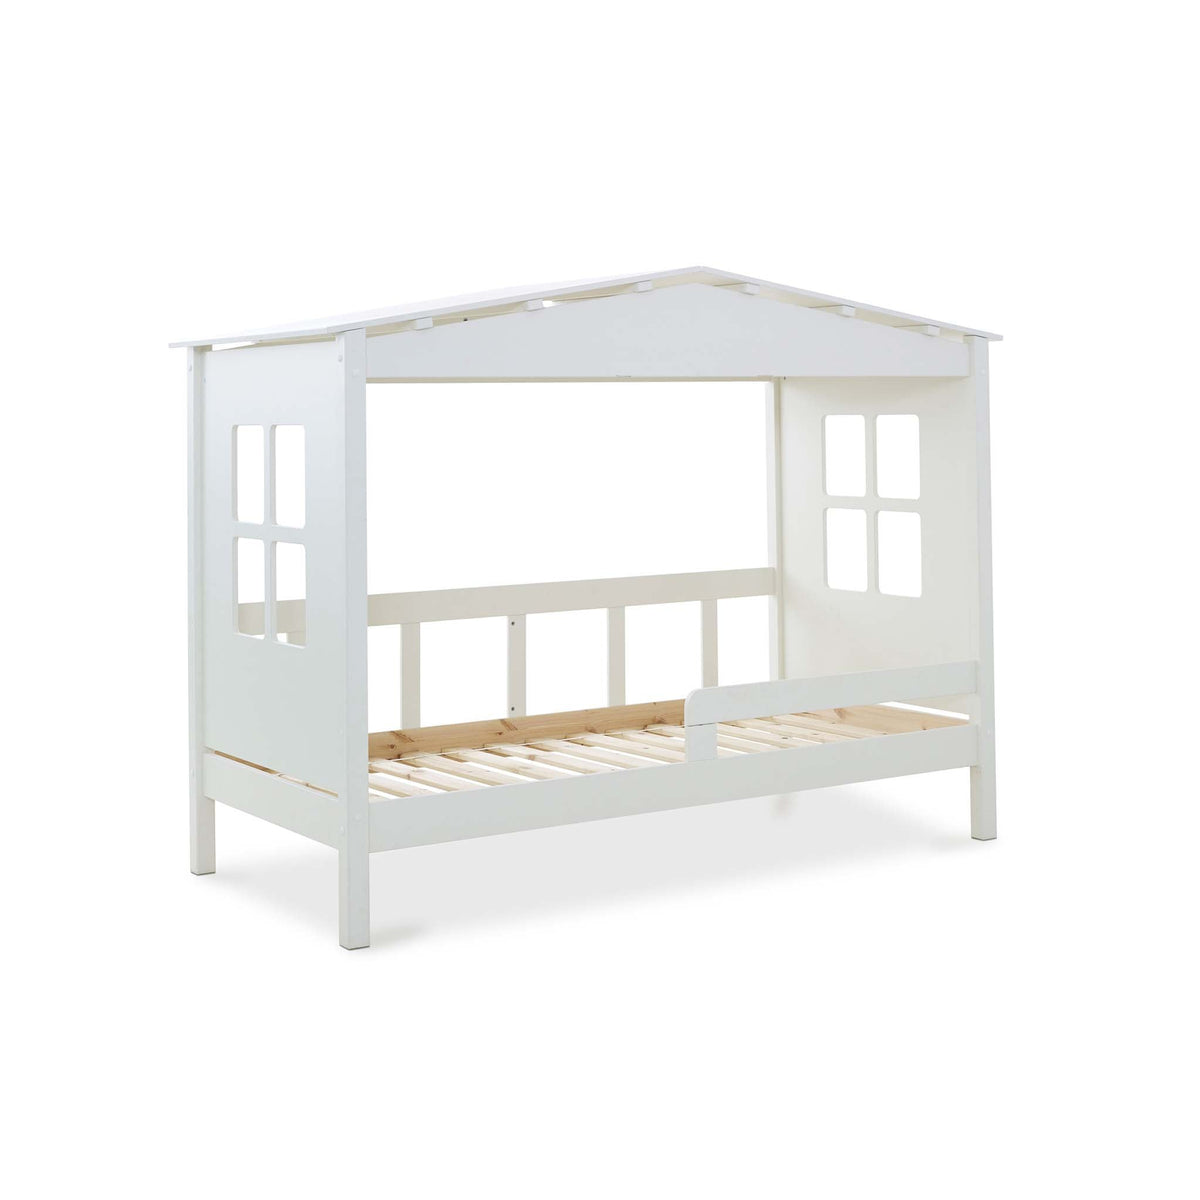 front view of the Childrens White Hideout Bed